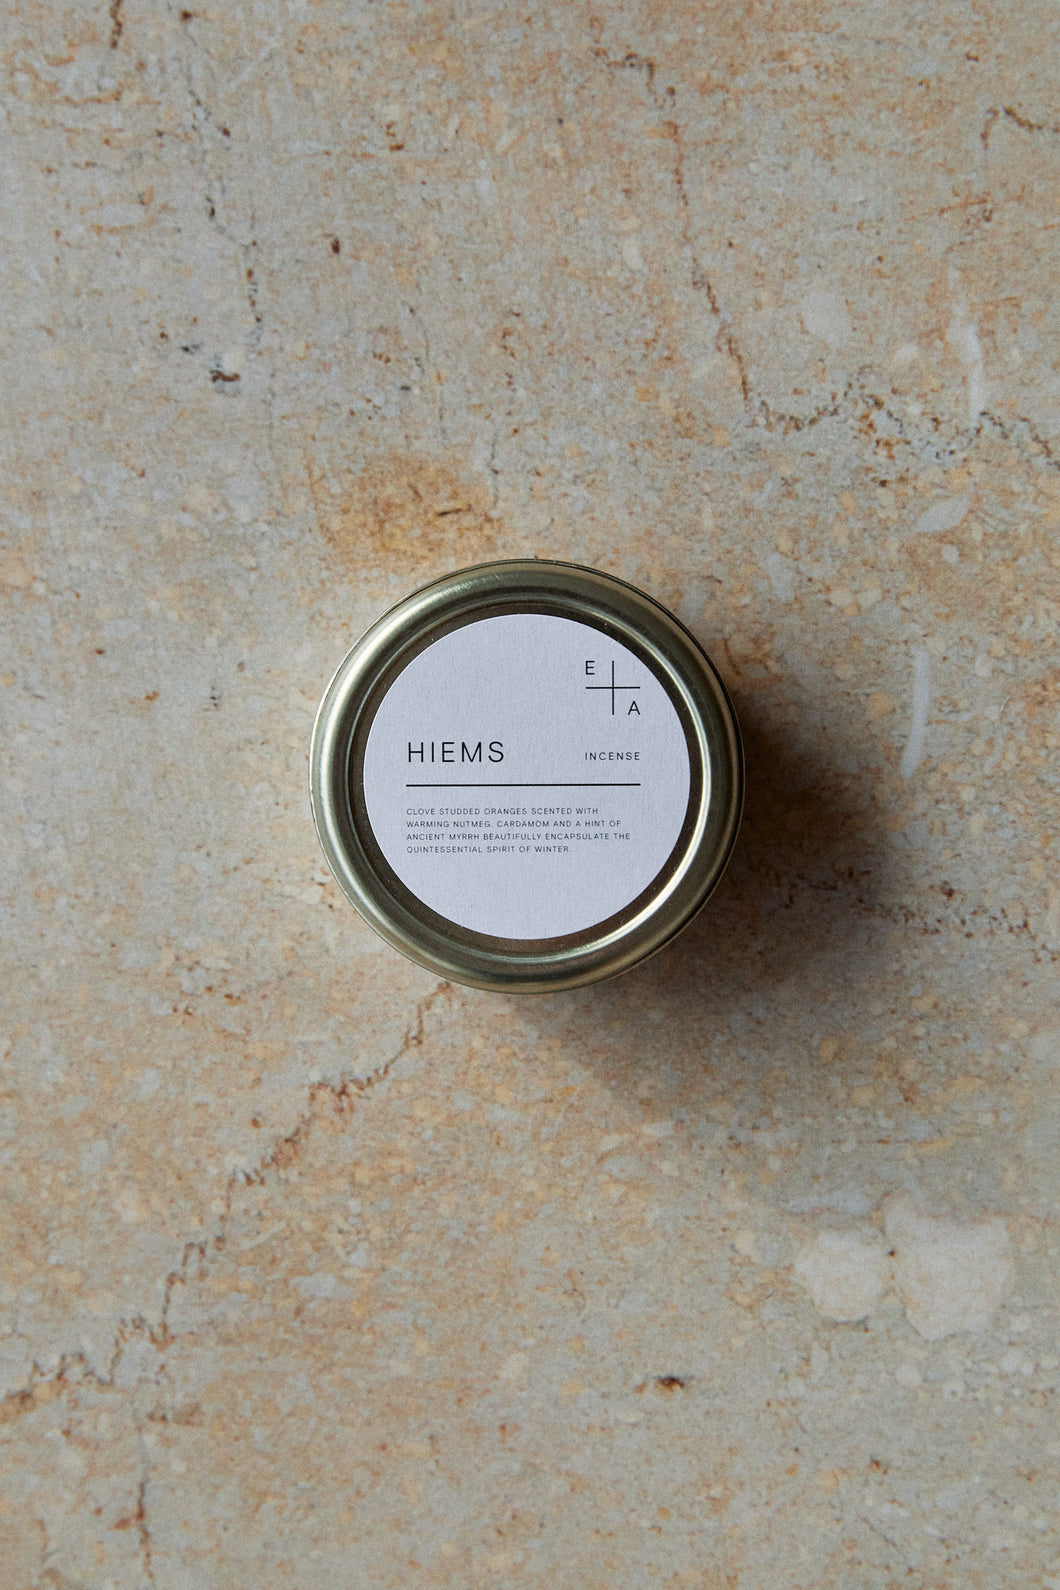 Shop with Settle | Essence + Alchemy Hiems Incense Cones - overview of a gleaming tin labelled HIEMS Essence + Alchemy containing scented incense cones, set on a pale grey marble surface against an apricot marble background at Settle.  